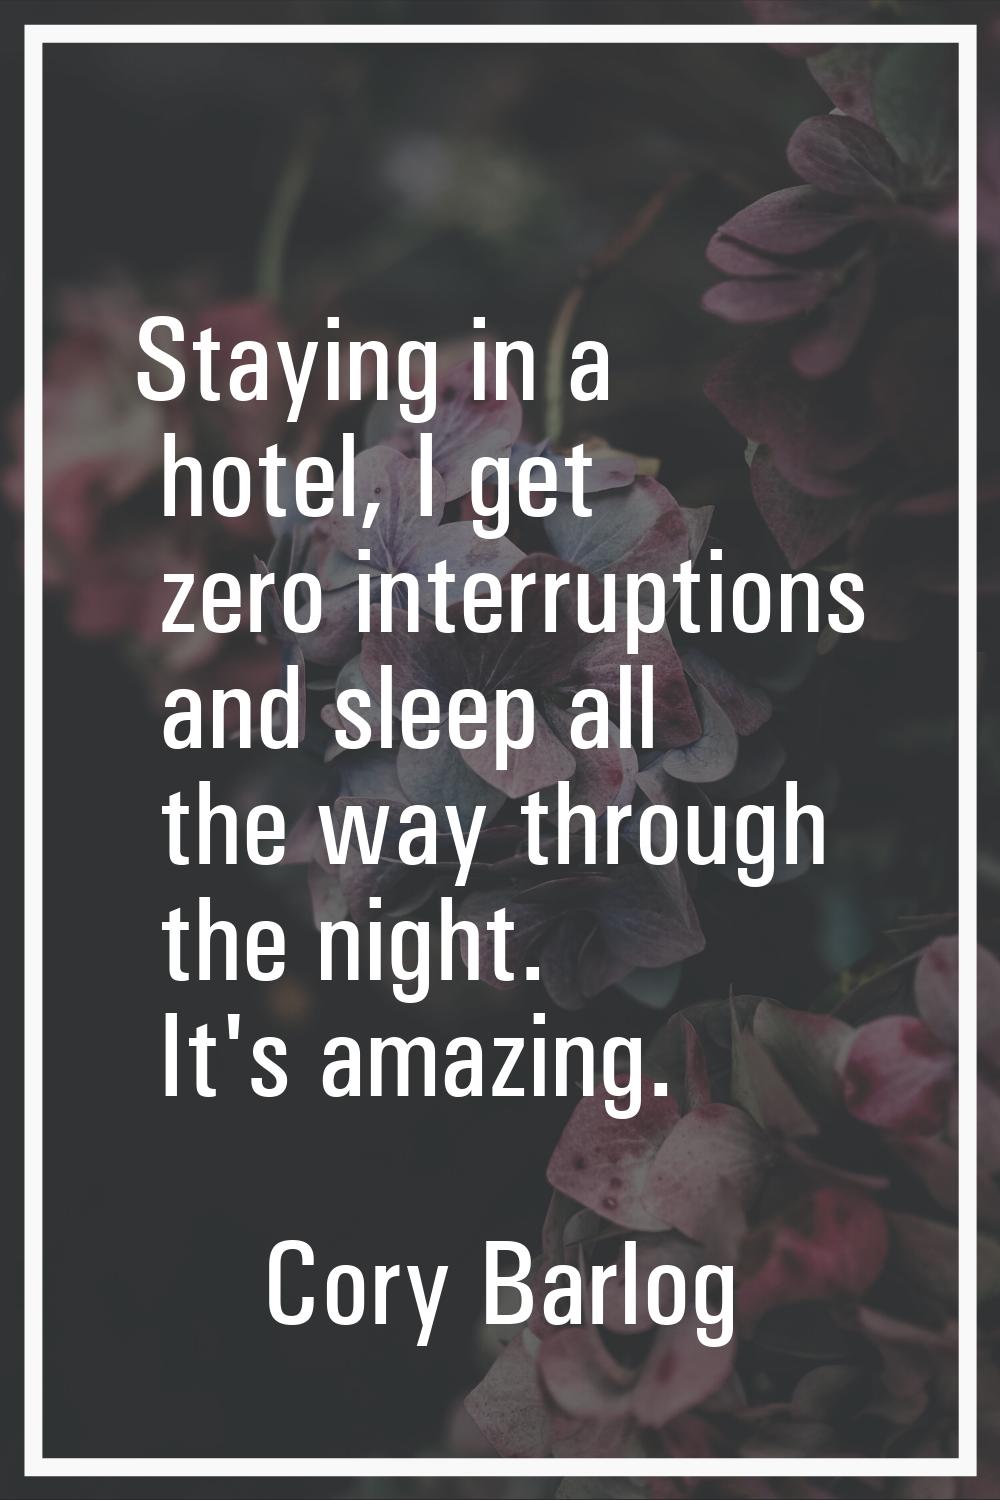 Staying in a hotel, I get zero interruptions and sleep all the way through the night. It's amazing.